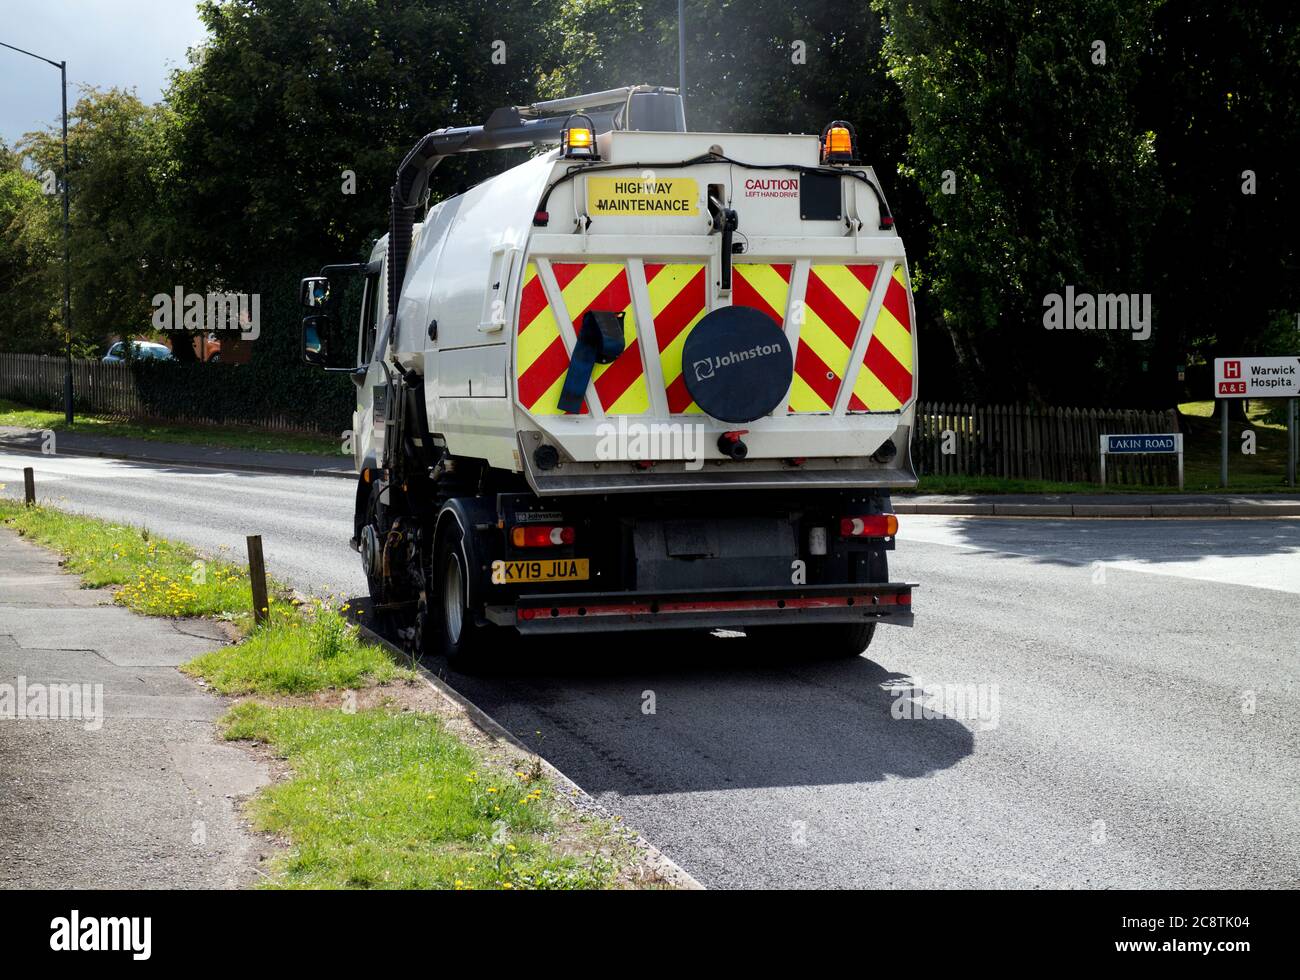 A road sweeper lorry clearing up loose chippings after road surfacing, Warwick, UK Stock Photo